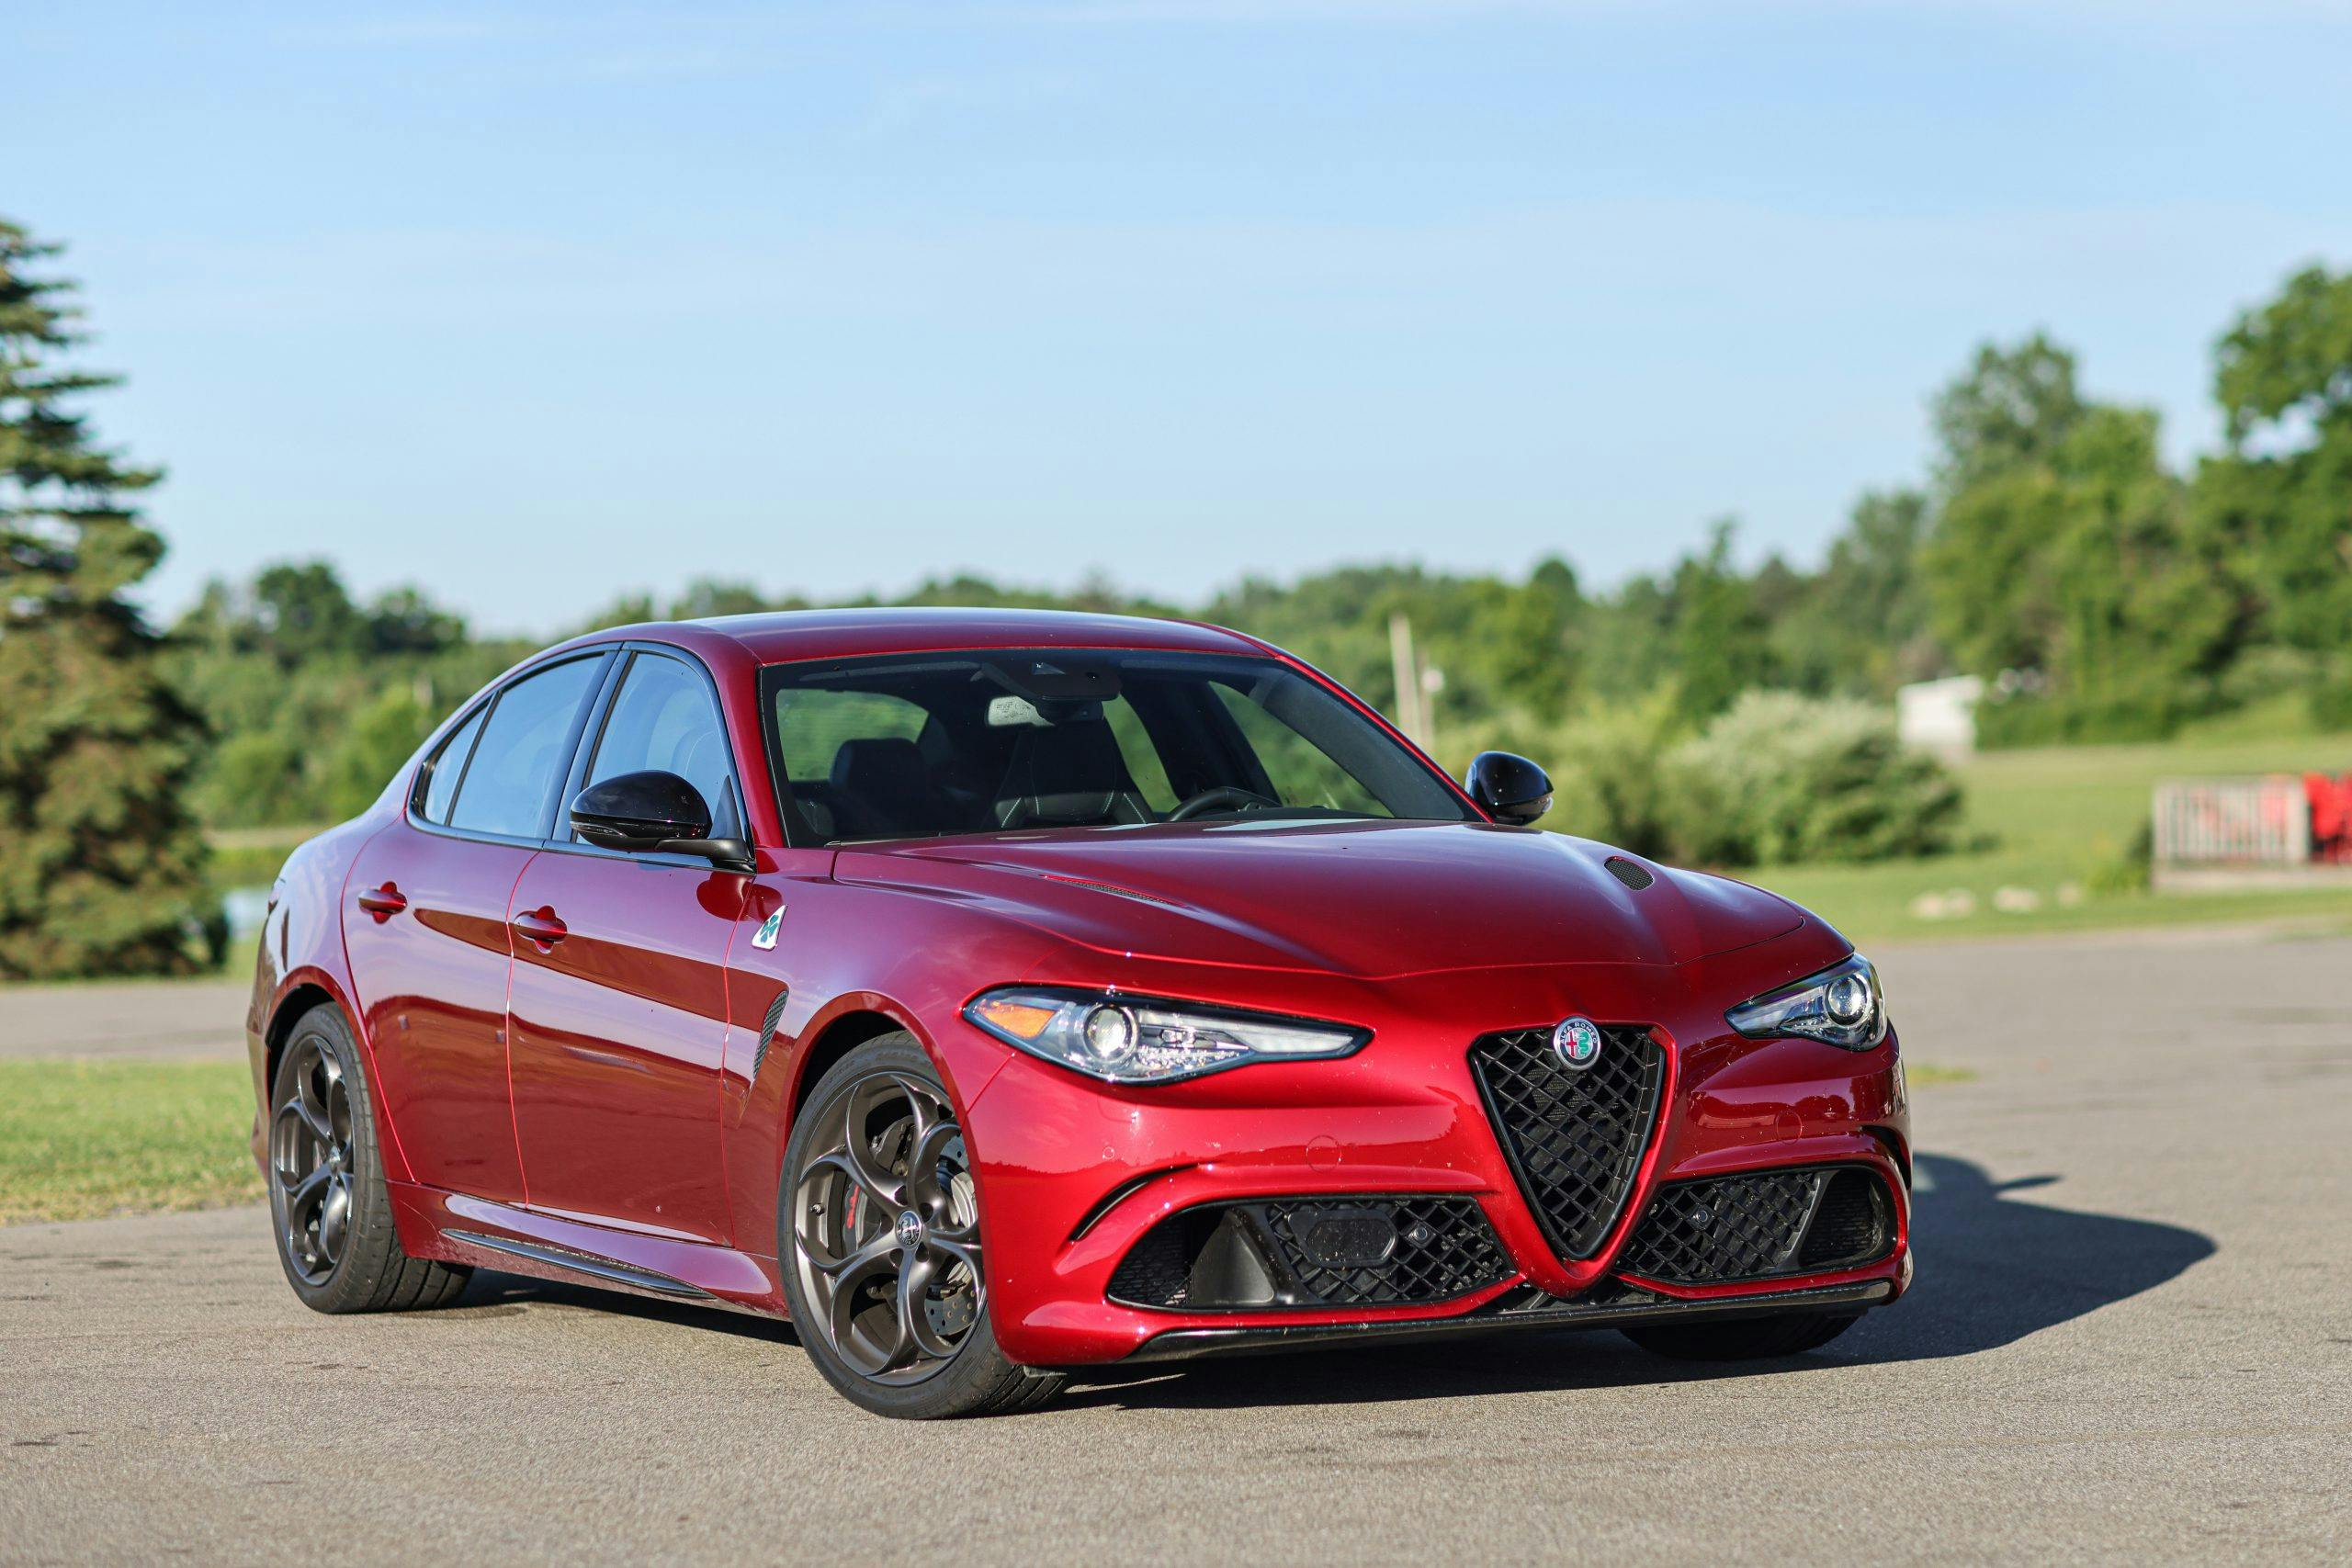 Alfa Romeo done introducing vehicles with gasoline engines